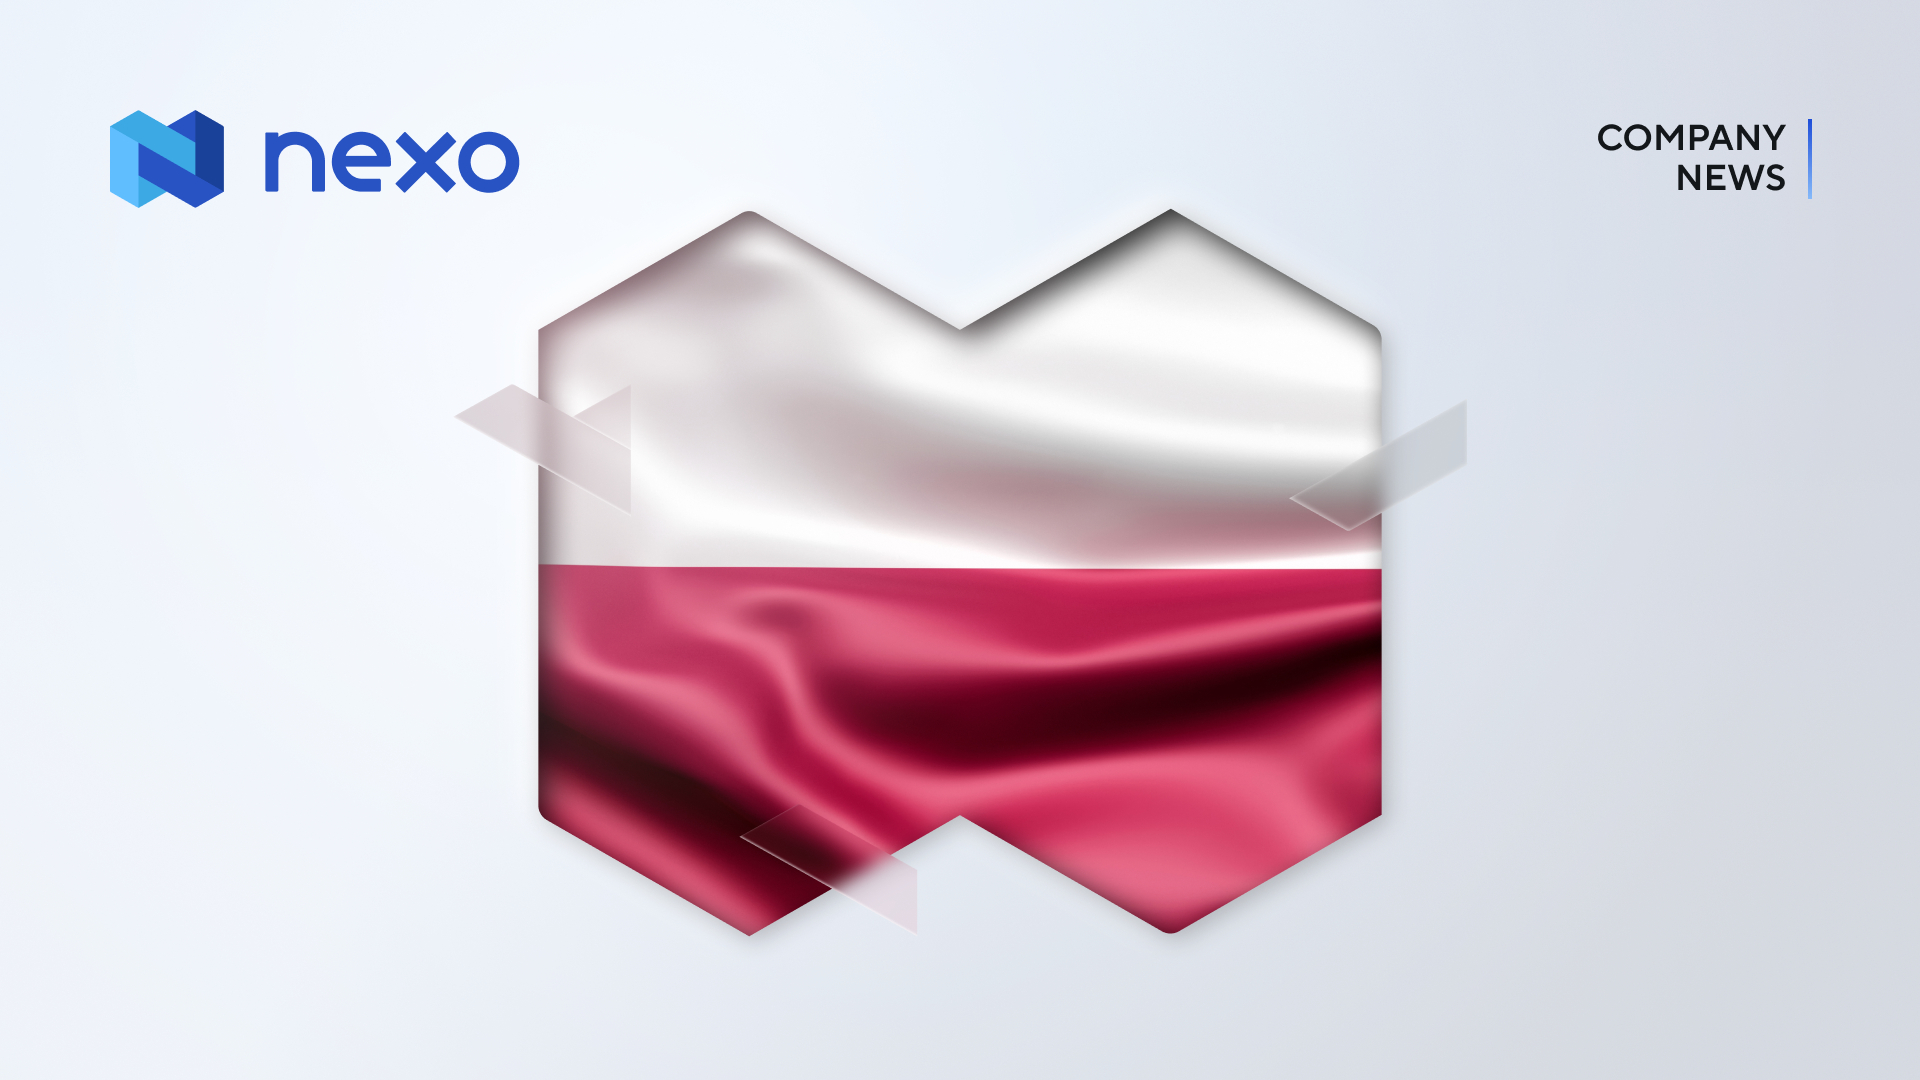 Nexo Continues Expansion of European Compliance, Wins Regulatory Approval in Poland